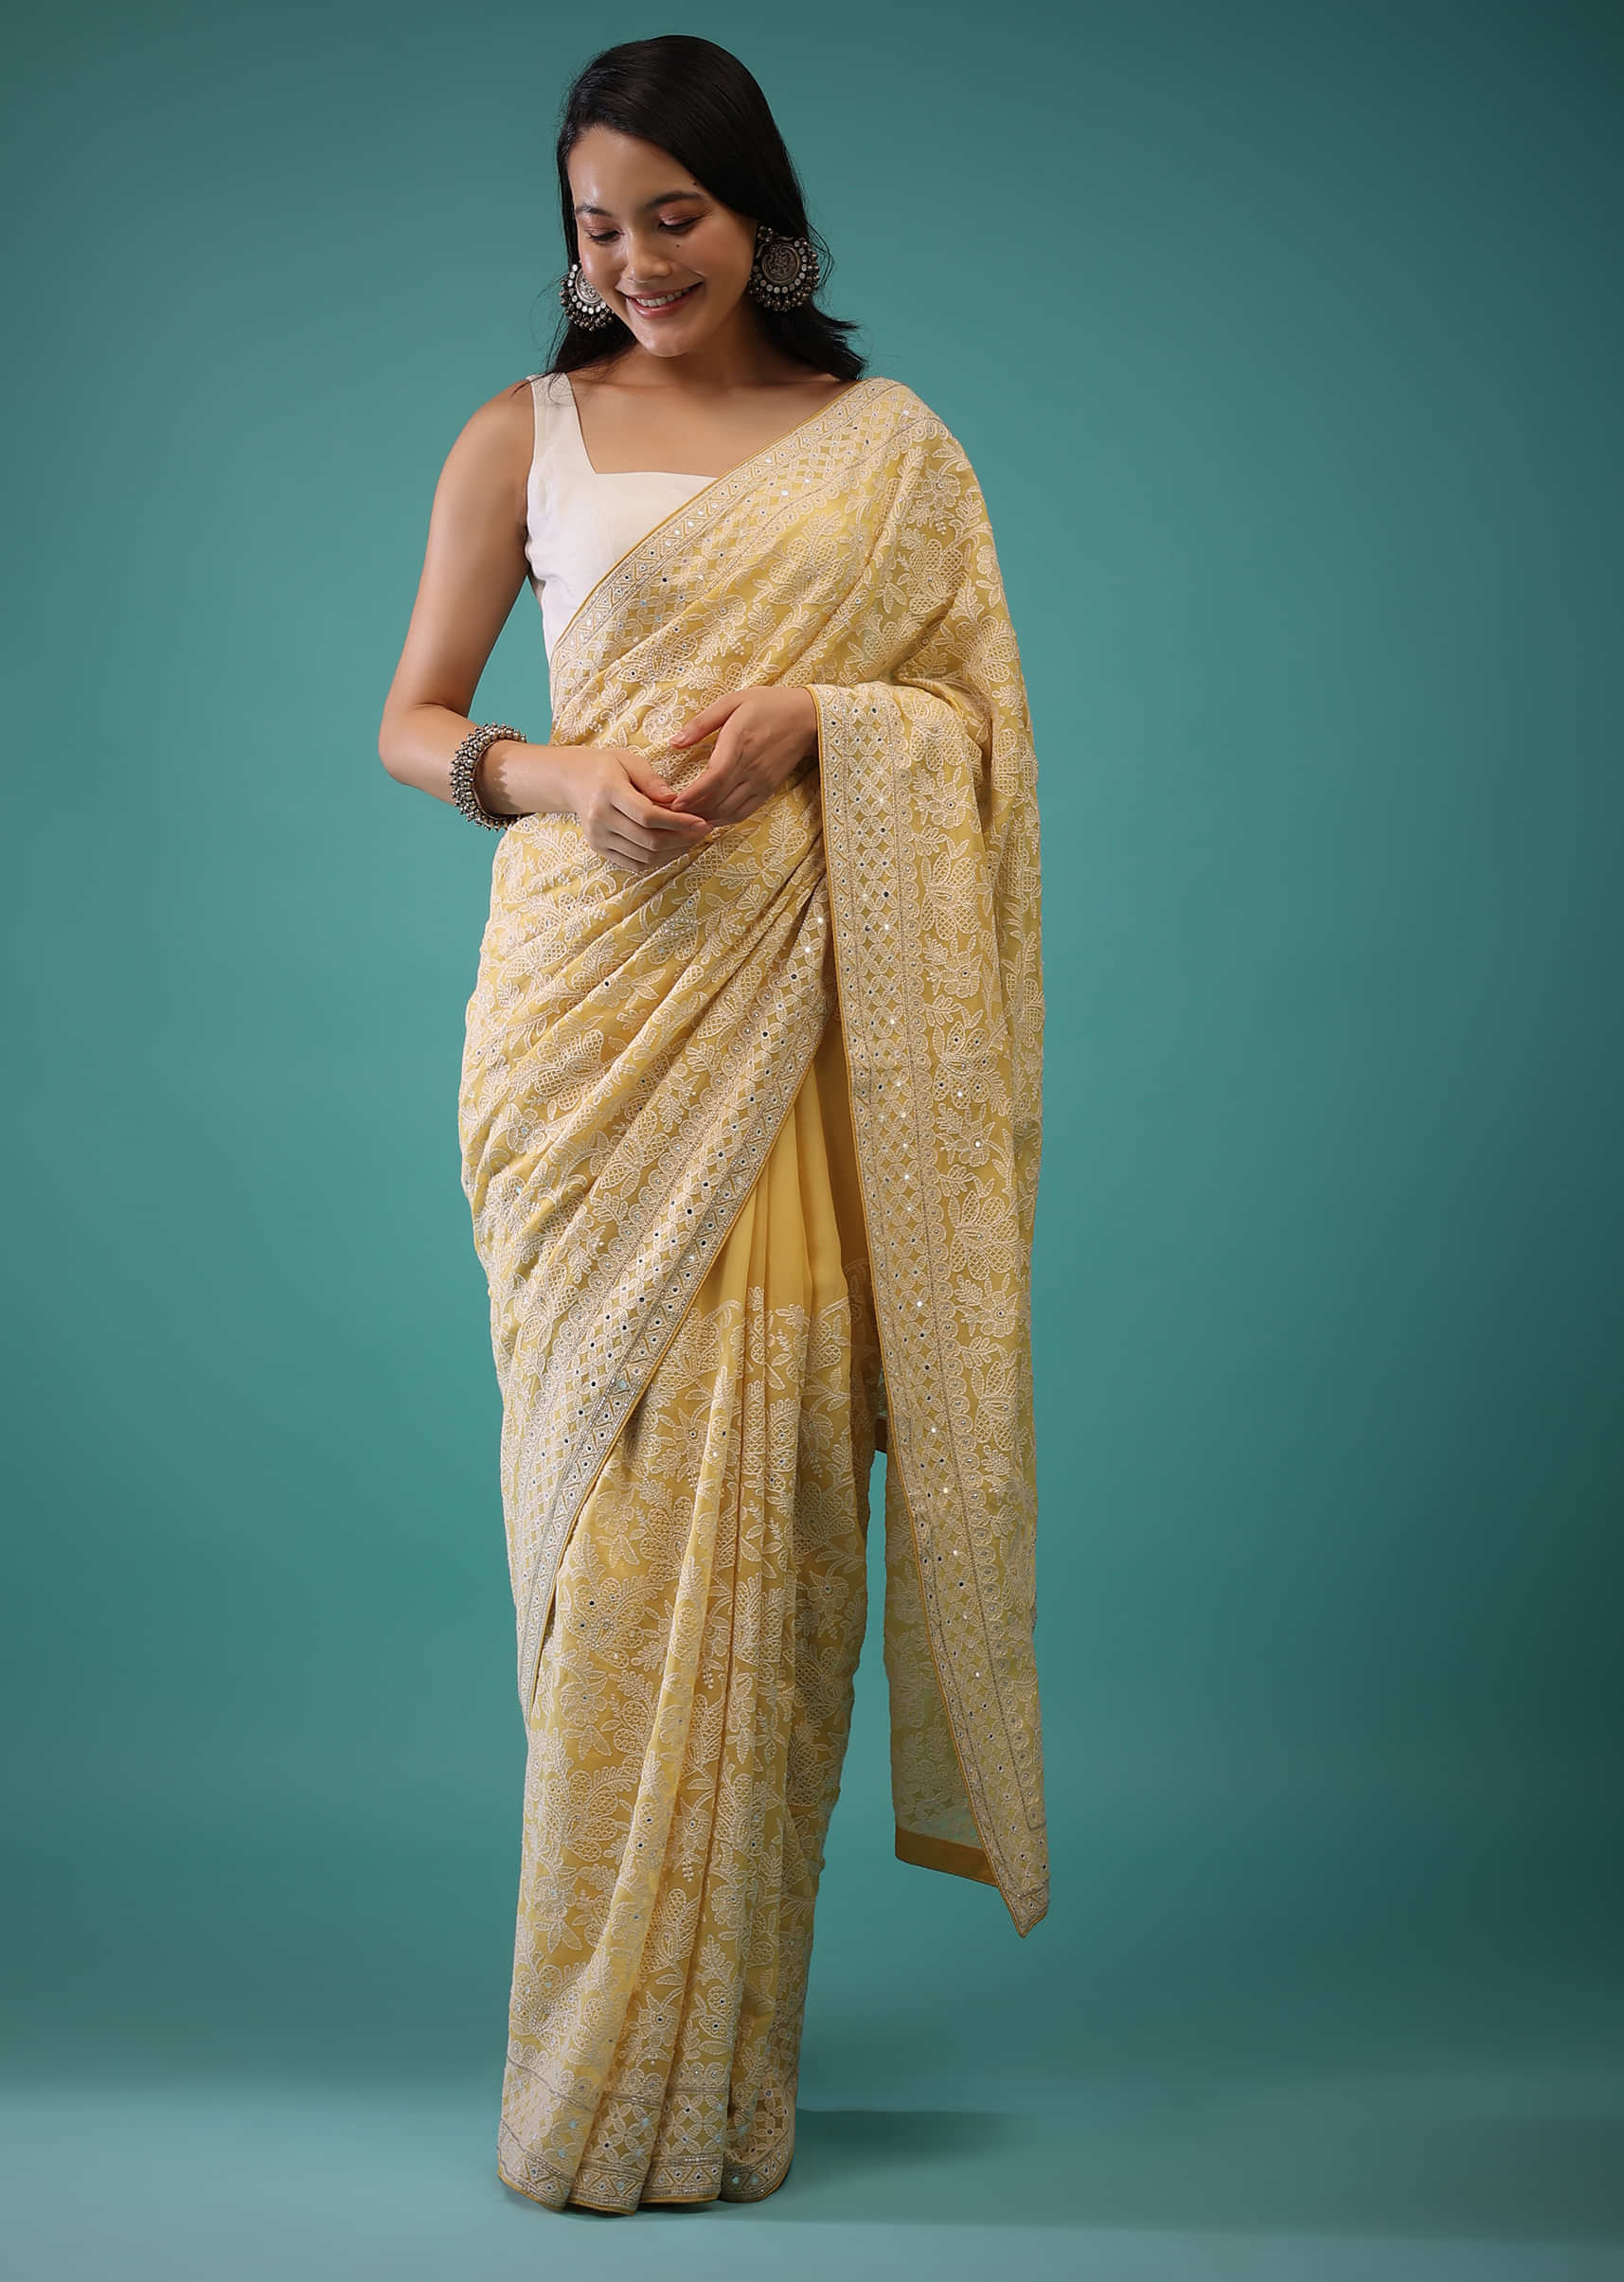 Lemon Drop Yellow Georgette Saree In Lucknowi Threadwork, Mirror Embroidery On The Border